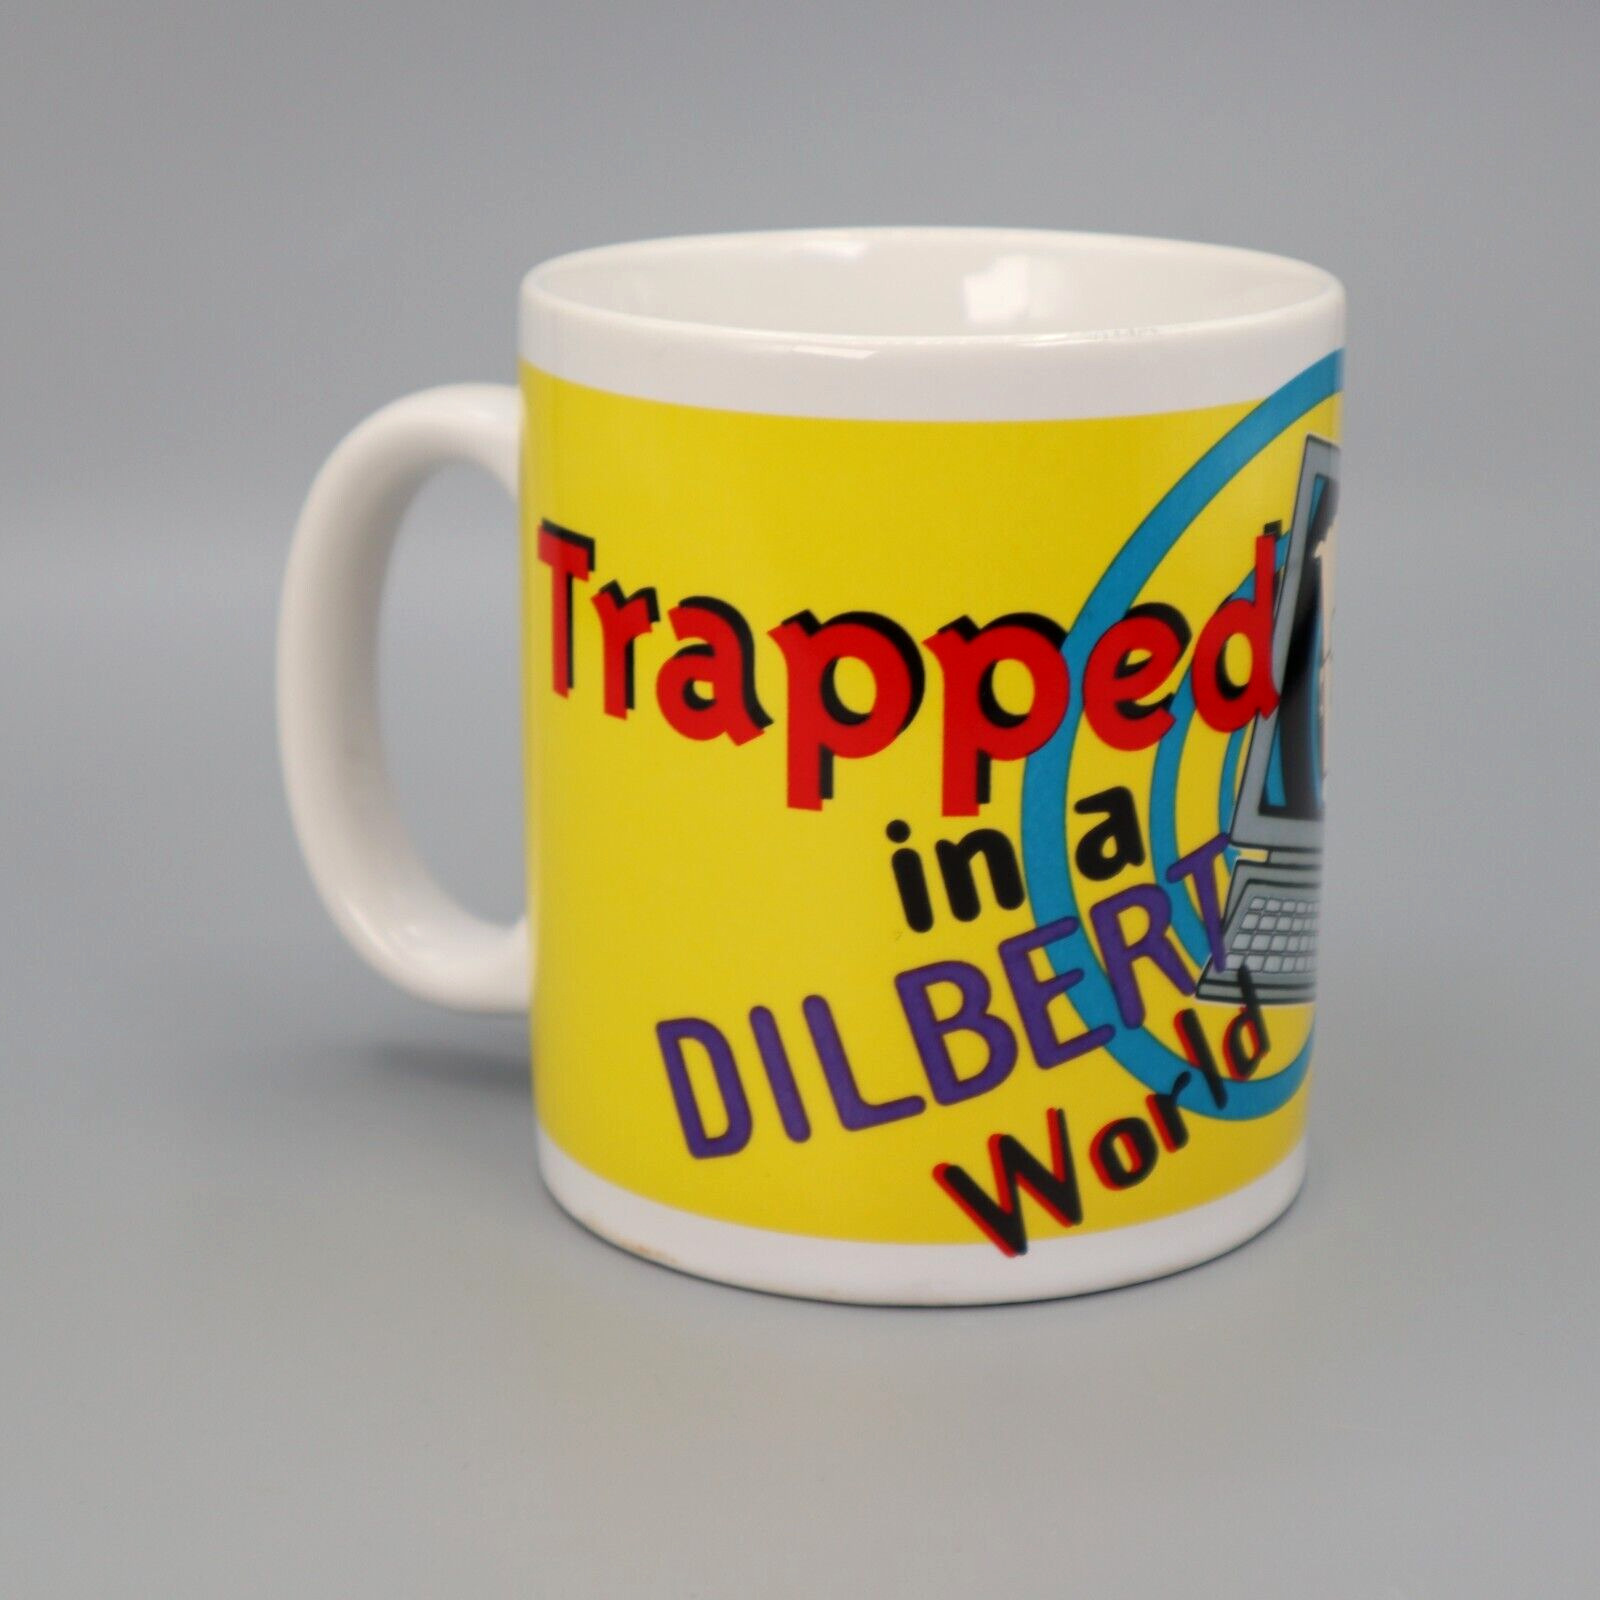 Dilbert Coffee Mug Cup By Scott Adams Trapped in a Dilbert World Official